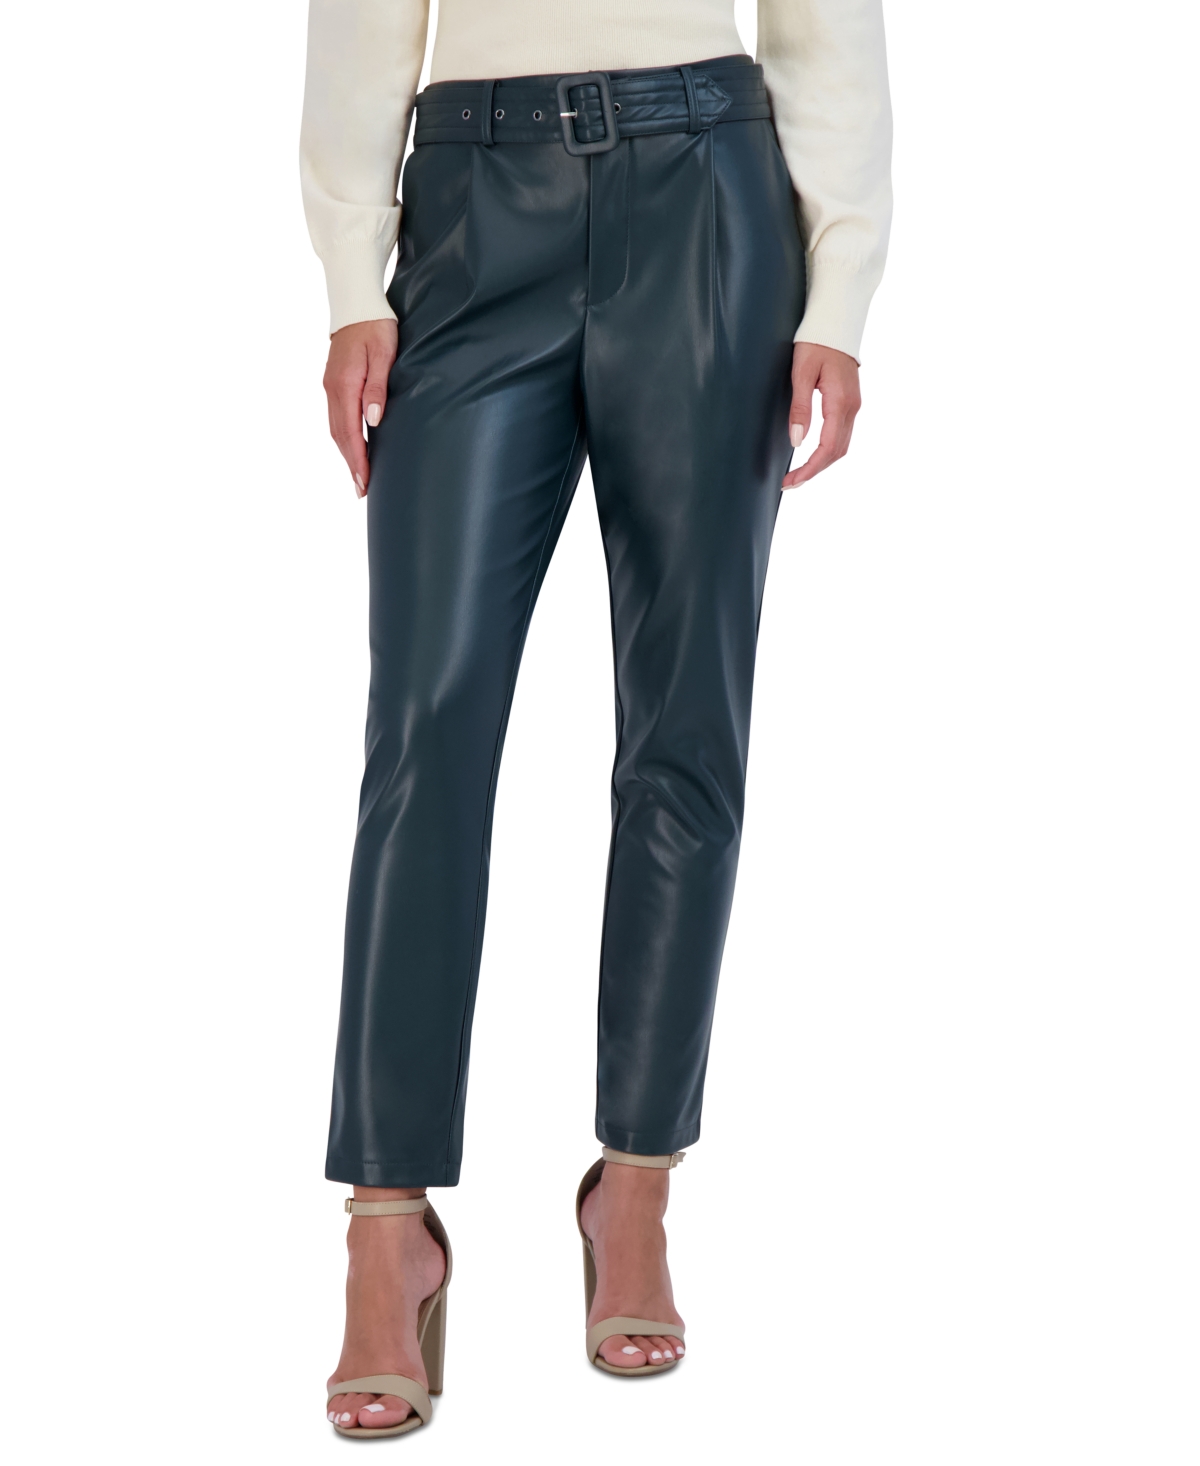 BCBGeneration Women's Belted High Rise Faux Leather Pants